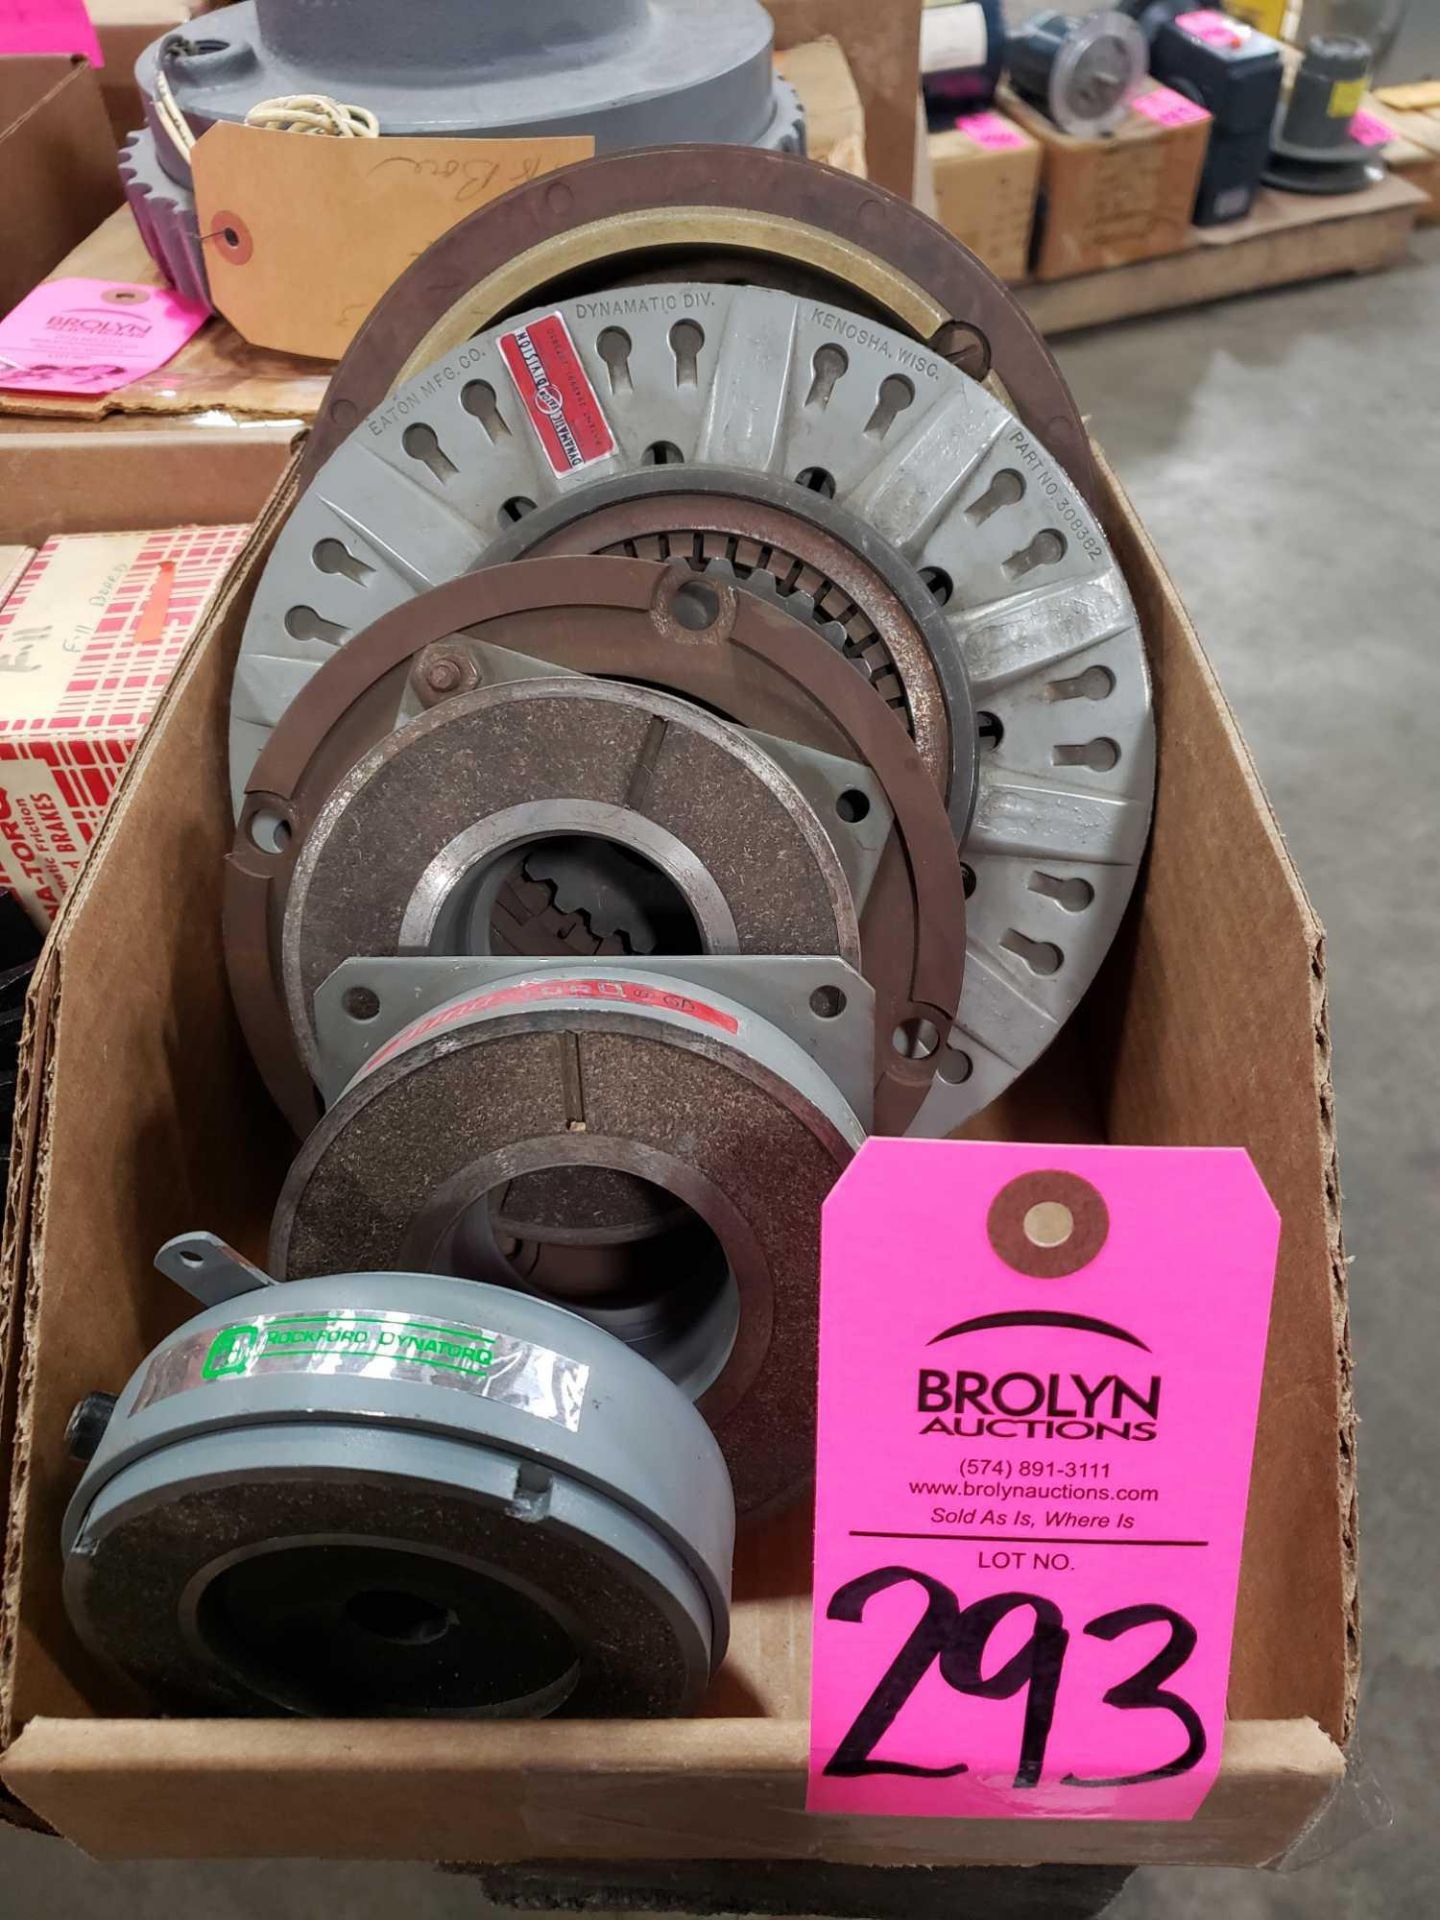 Assorted Dynamatics and Dynatorq brake and parts. Appear new old stock.